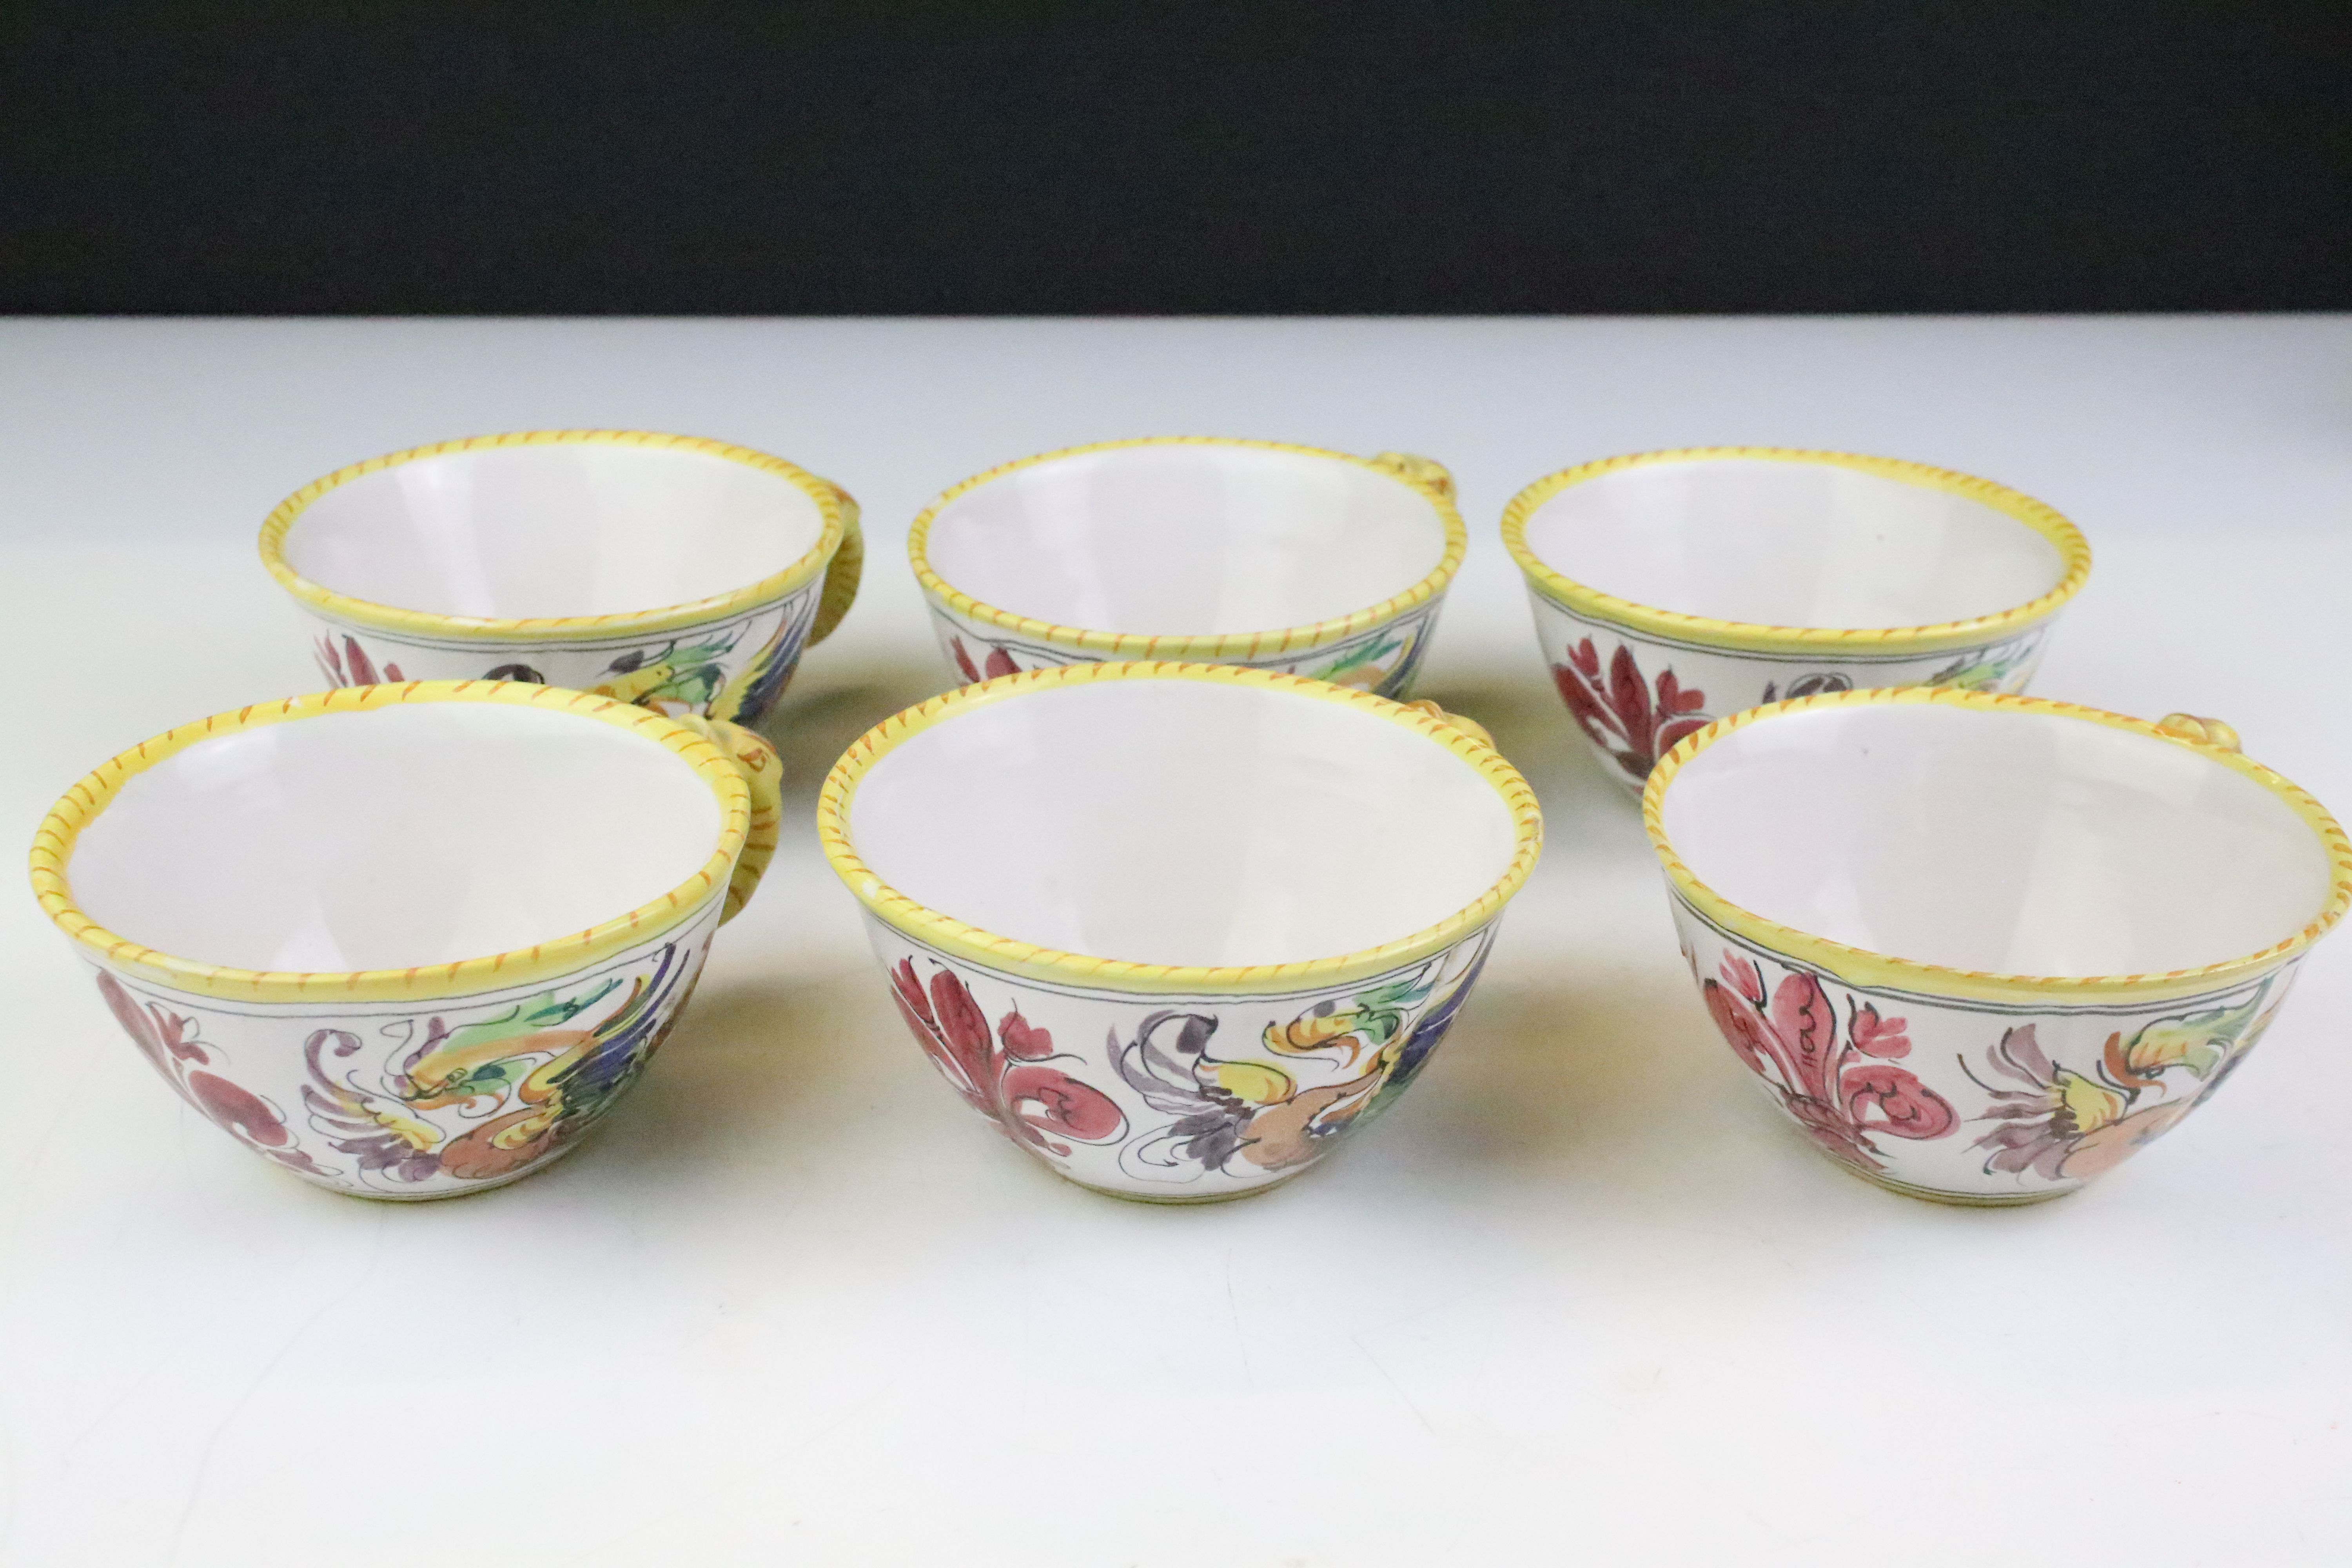 Italian faience tea set with scrolling & floral decoration and yellow border, the lot to include - Image 13 of 14